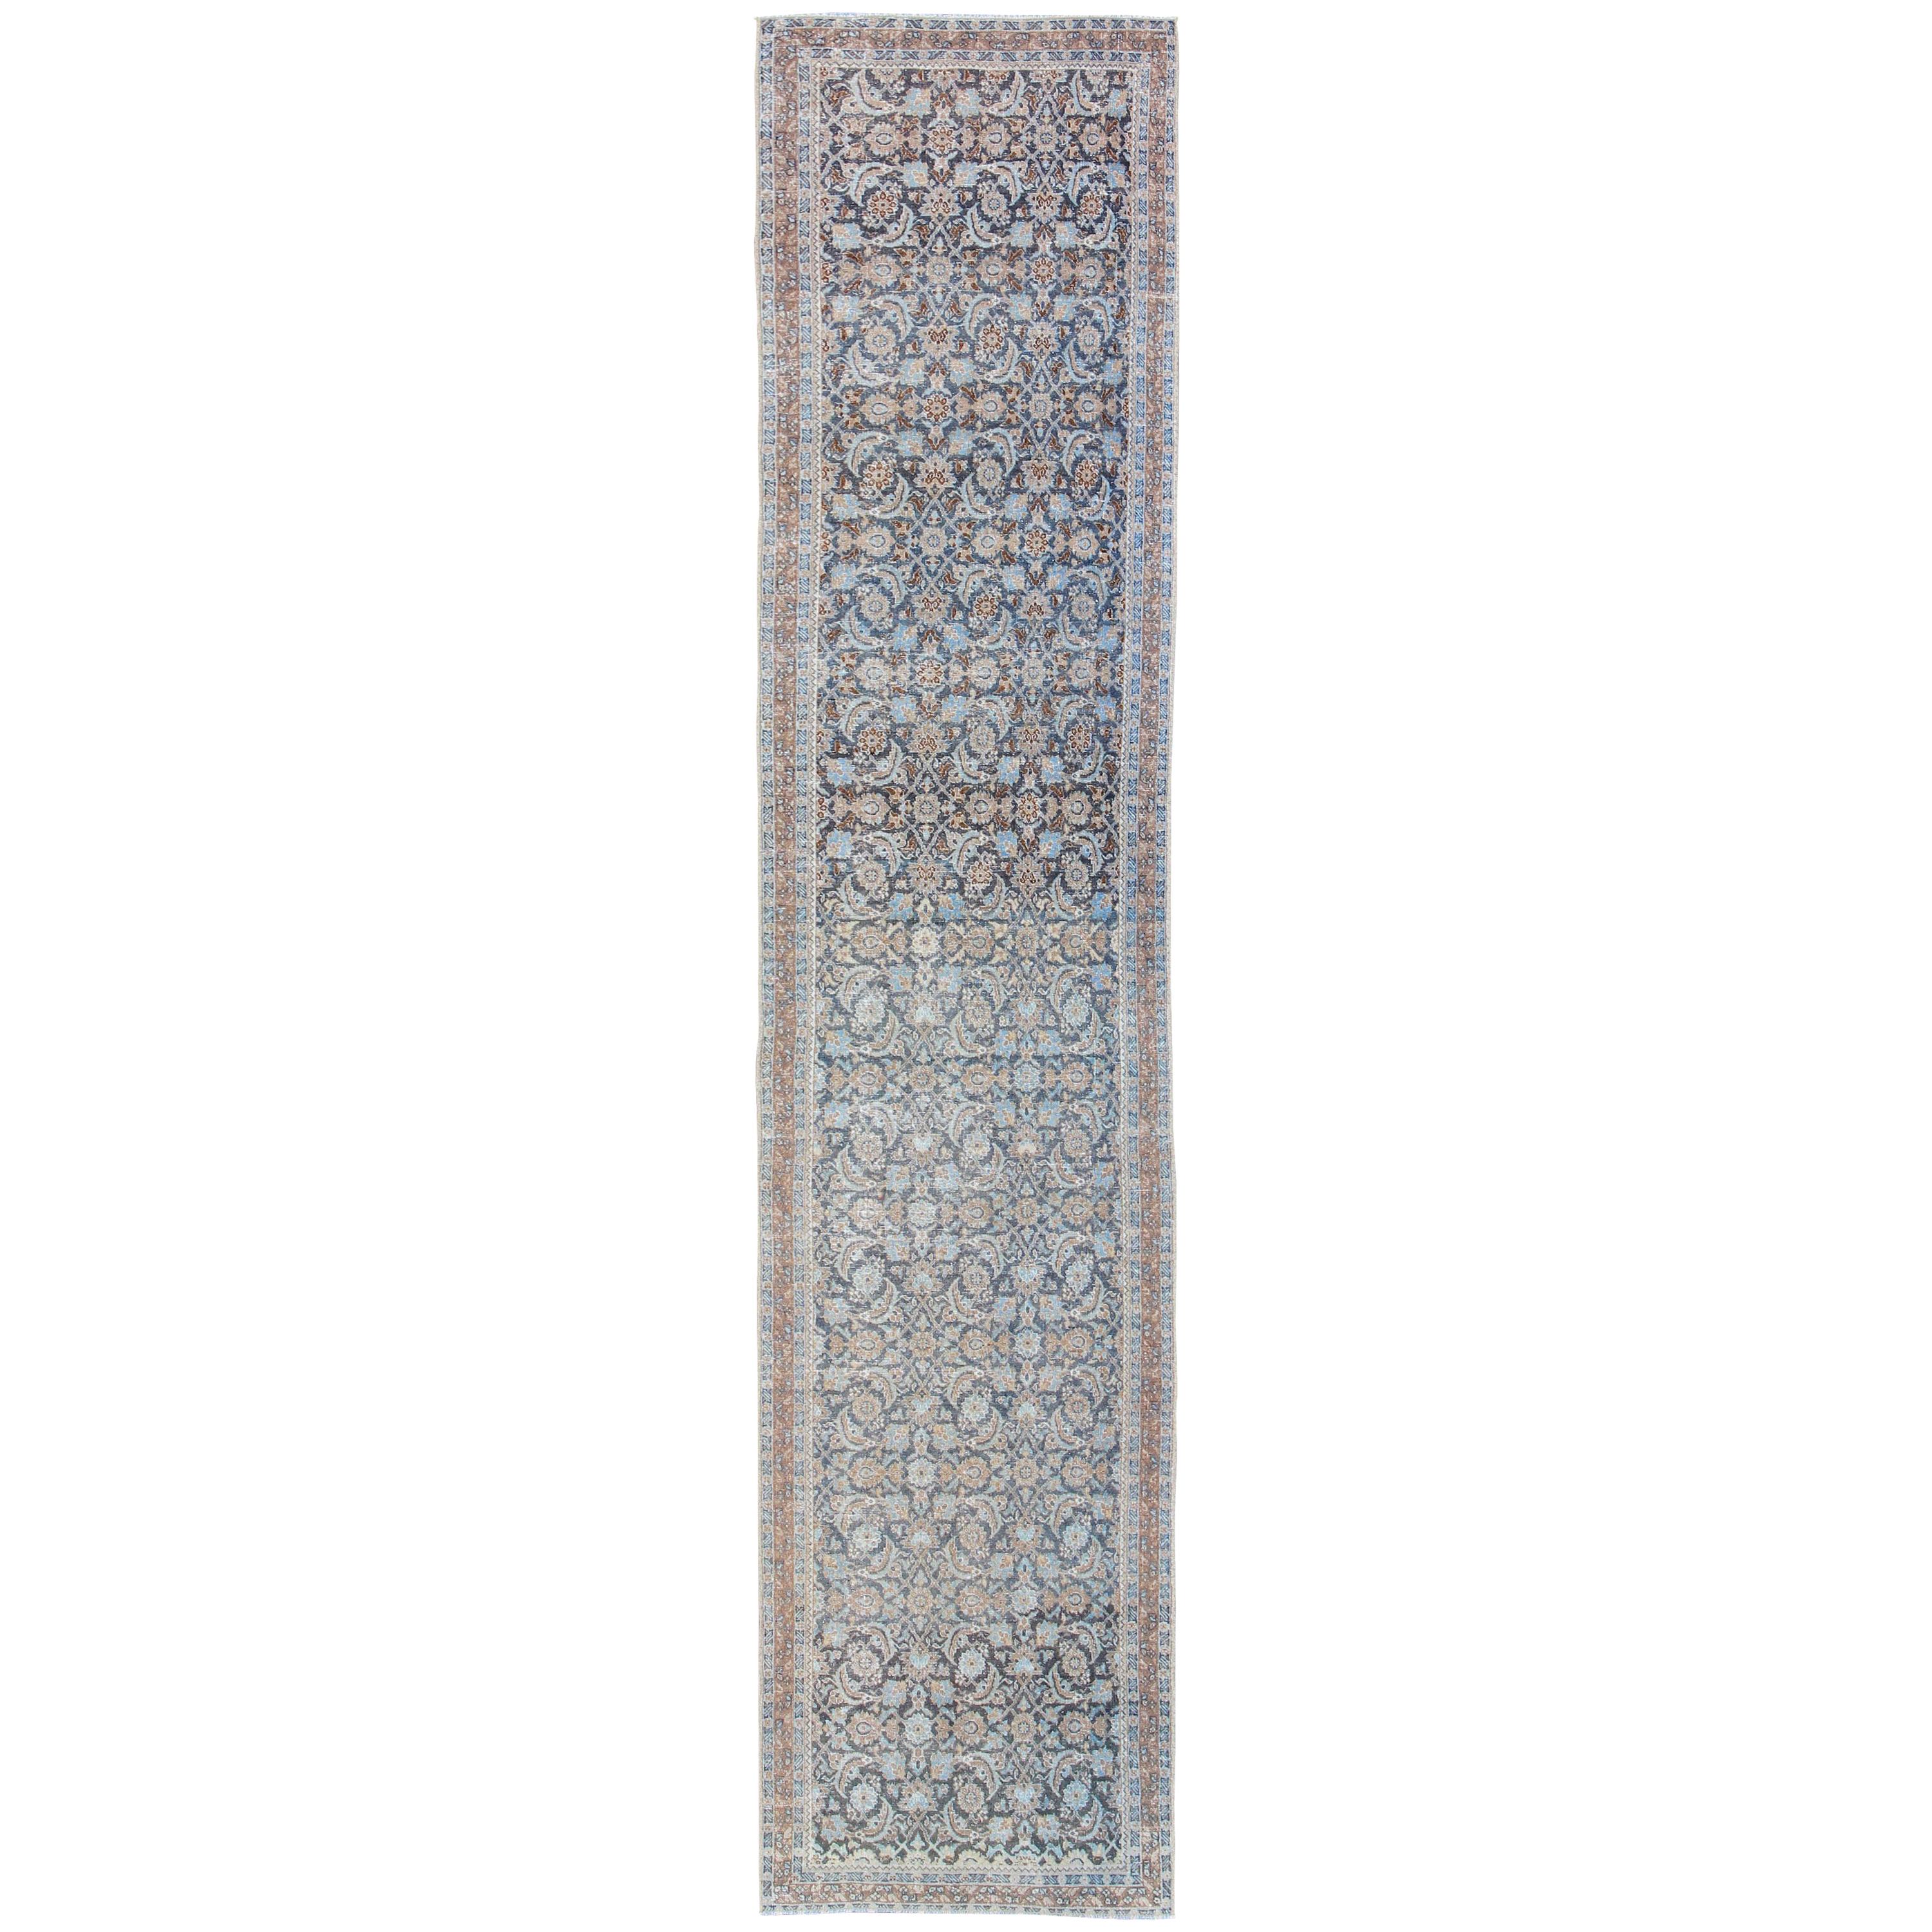 Vintage Persian Tabriz Runner with Ornate Floral Design in Blue and Taupe